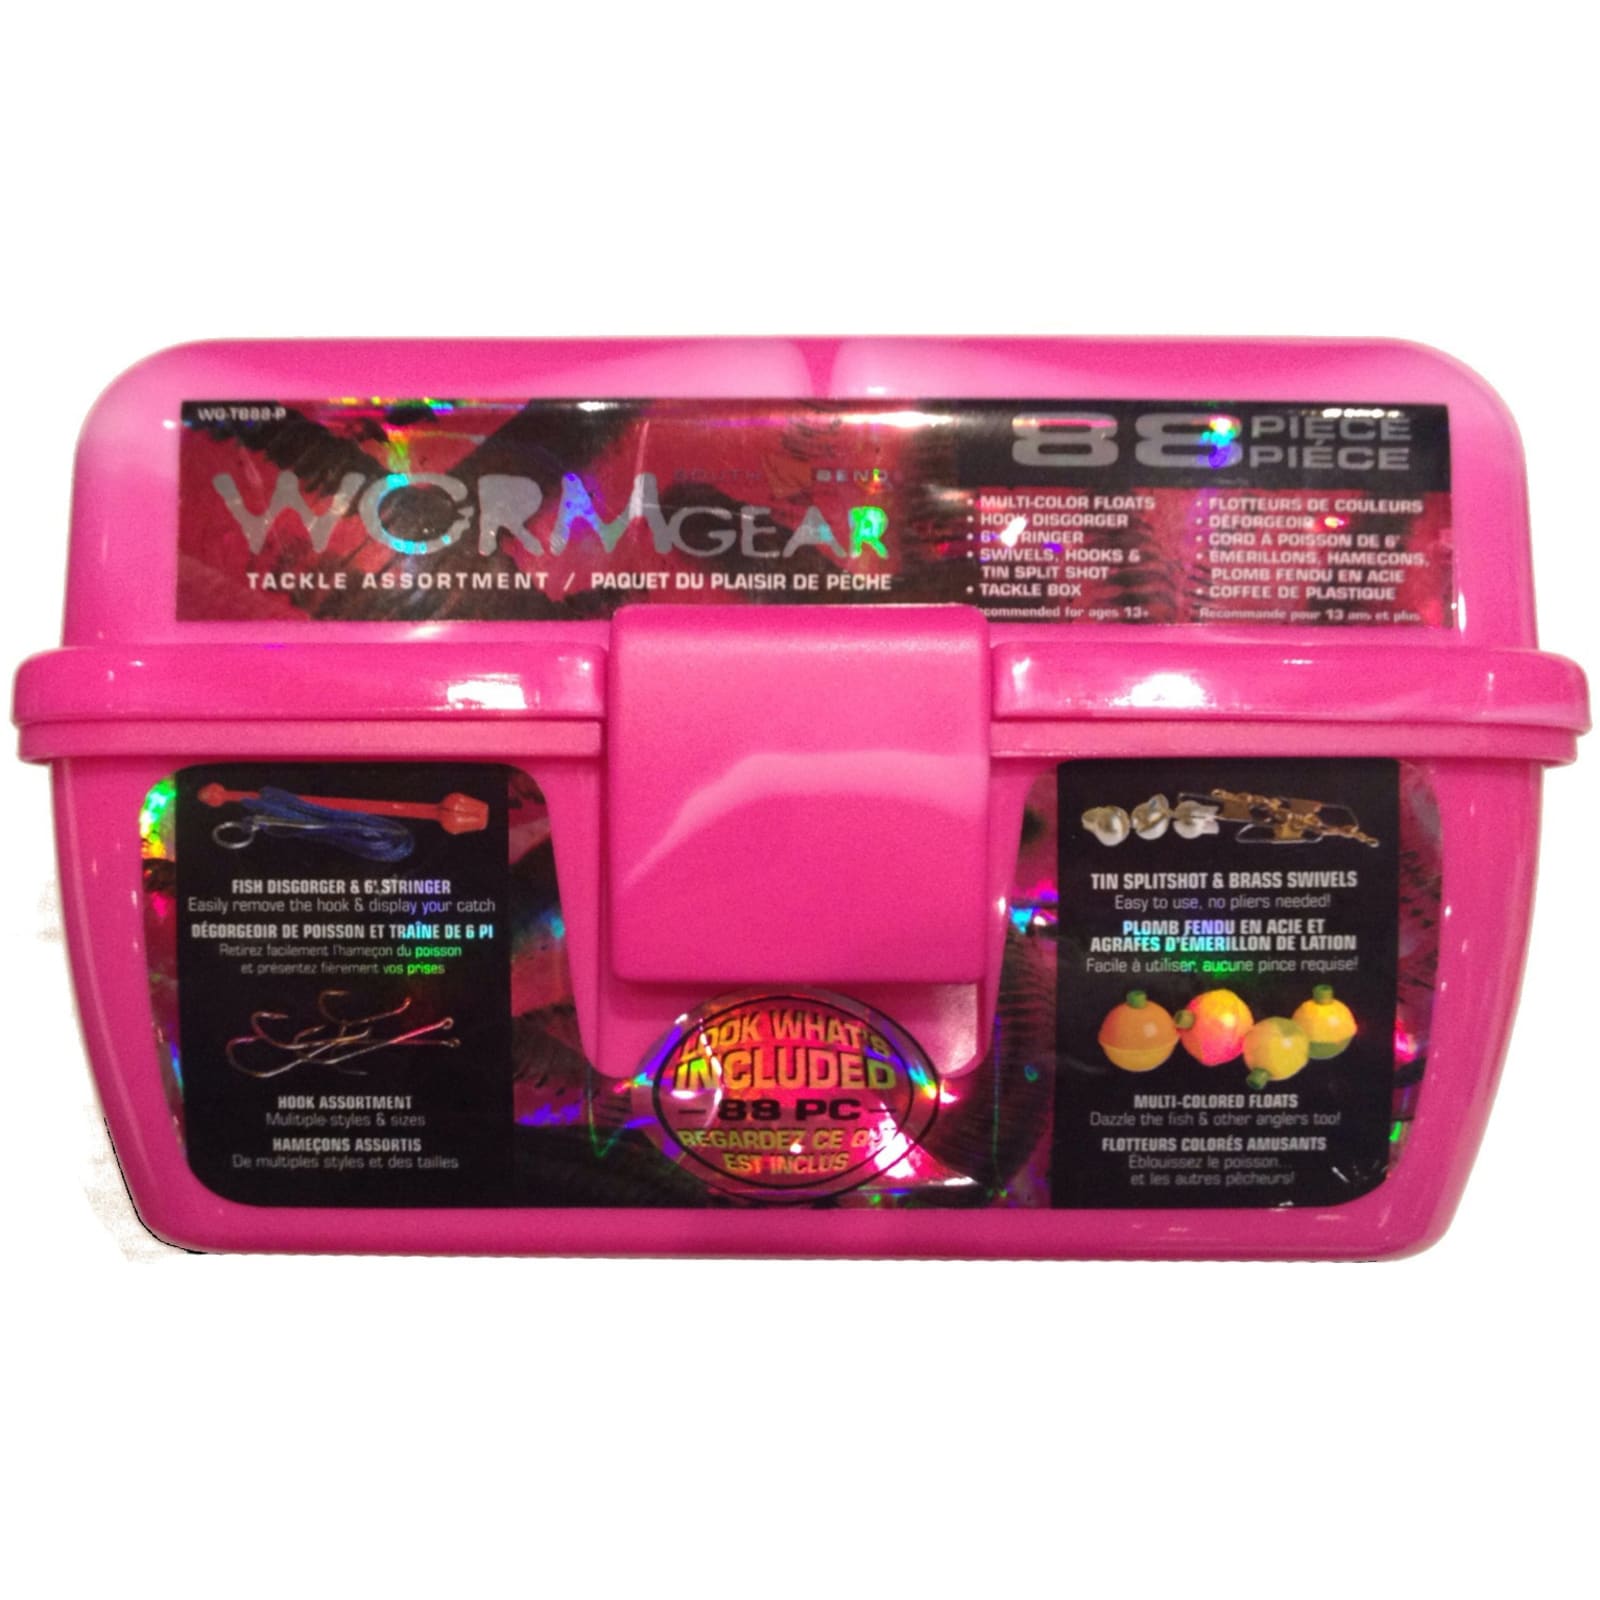 88 Pc. Tackle Box - Pink by Worm Gear at Fleet Farm